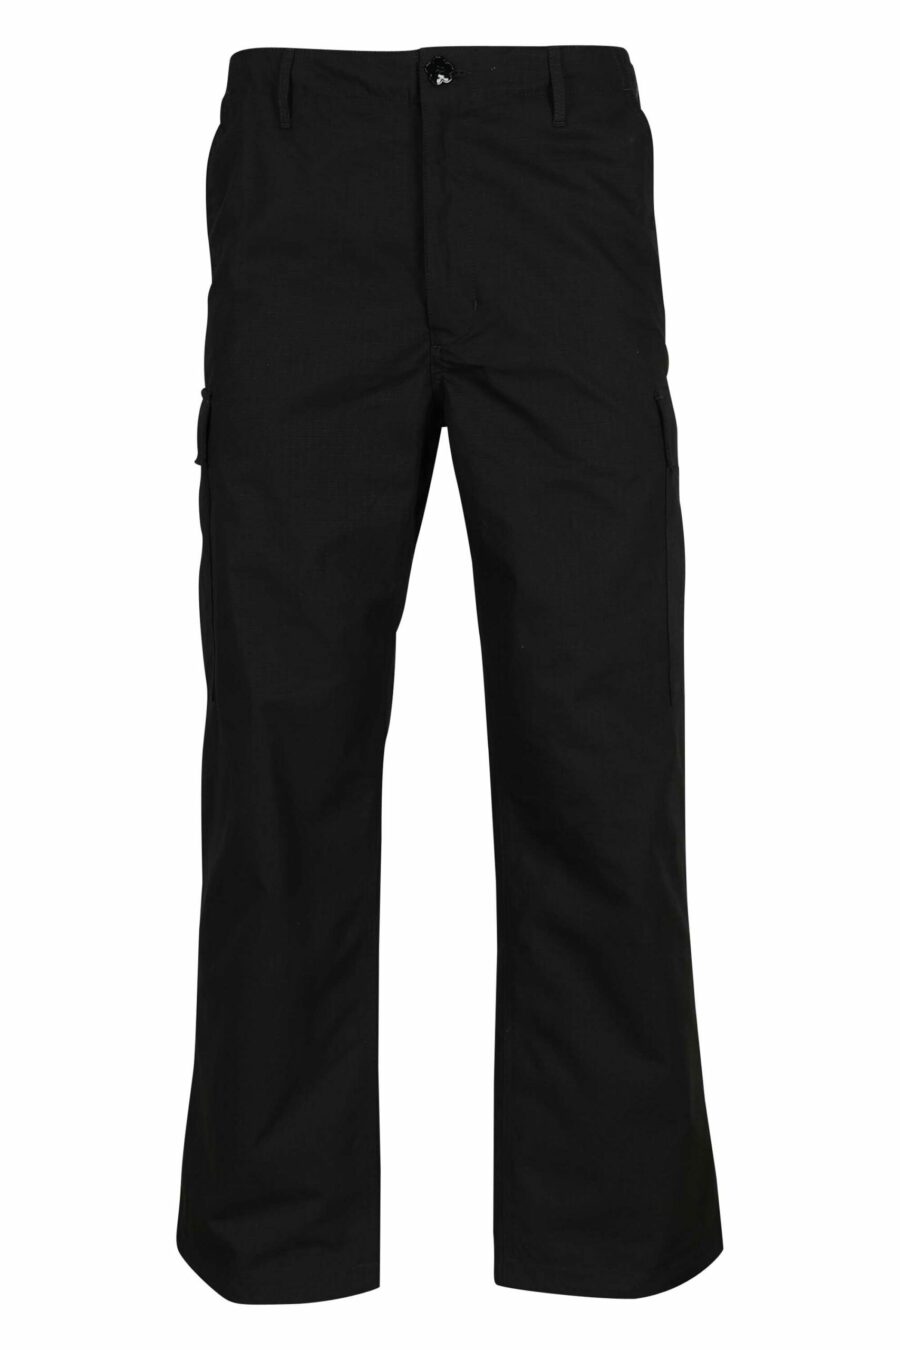 Black cargo trousers with "boke flower" logo - 3612230618855 scaled